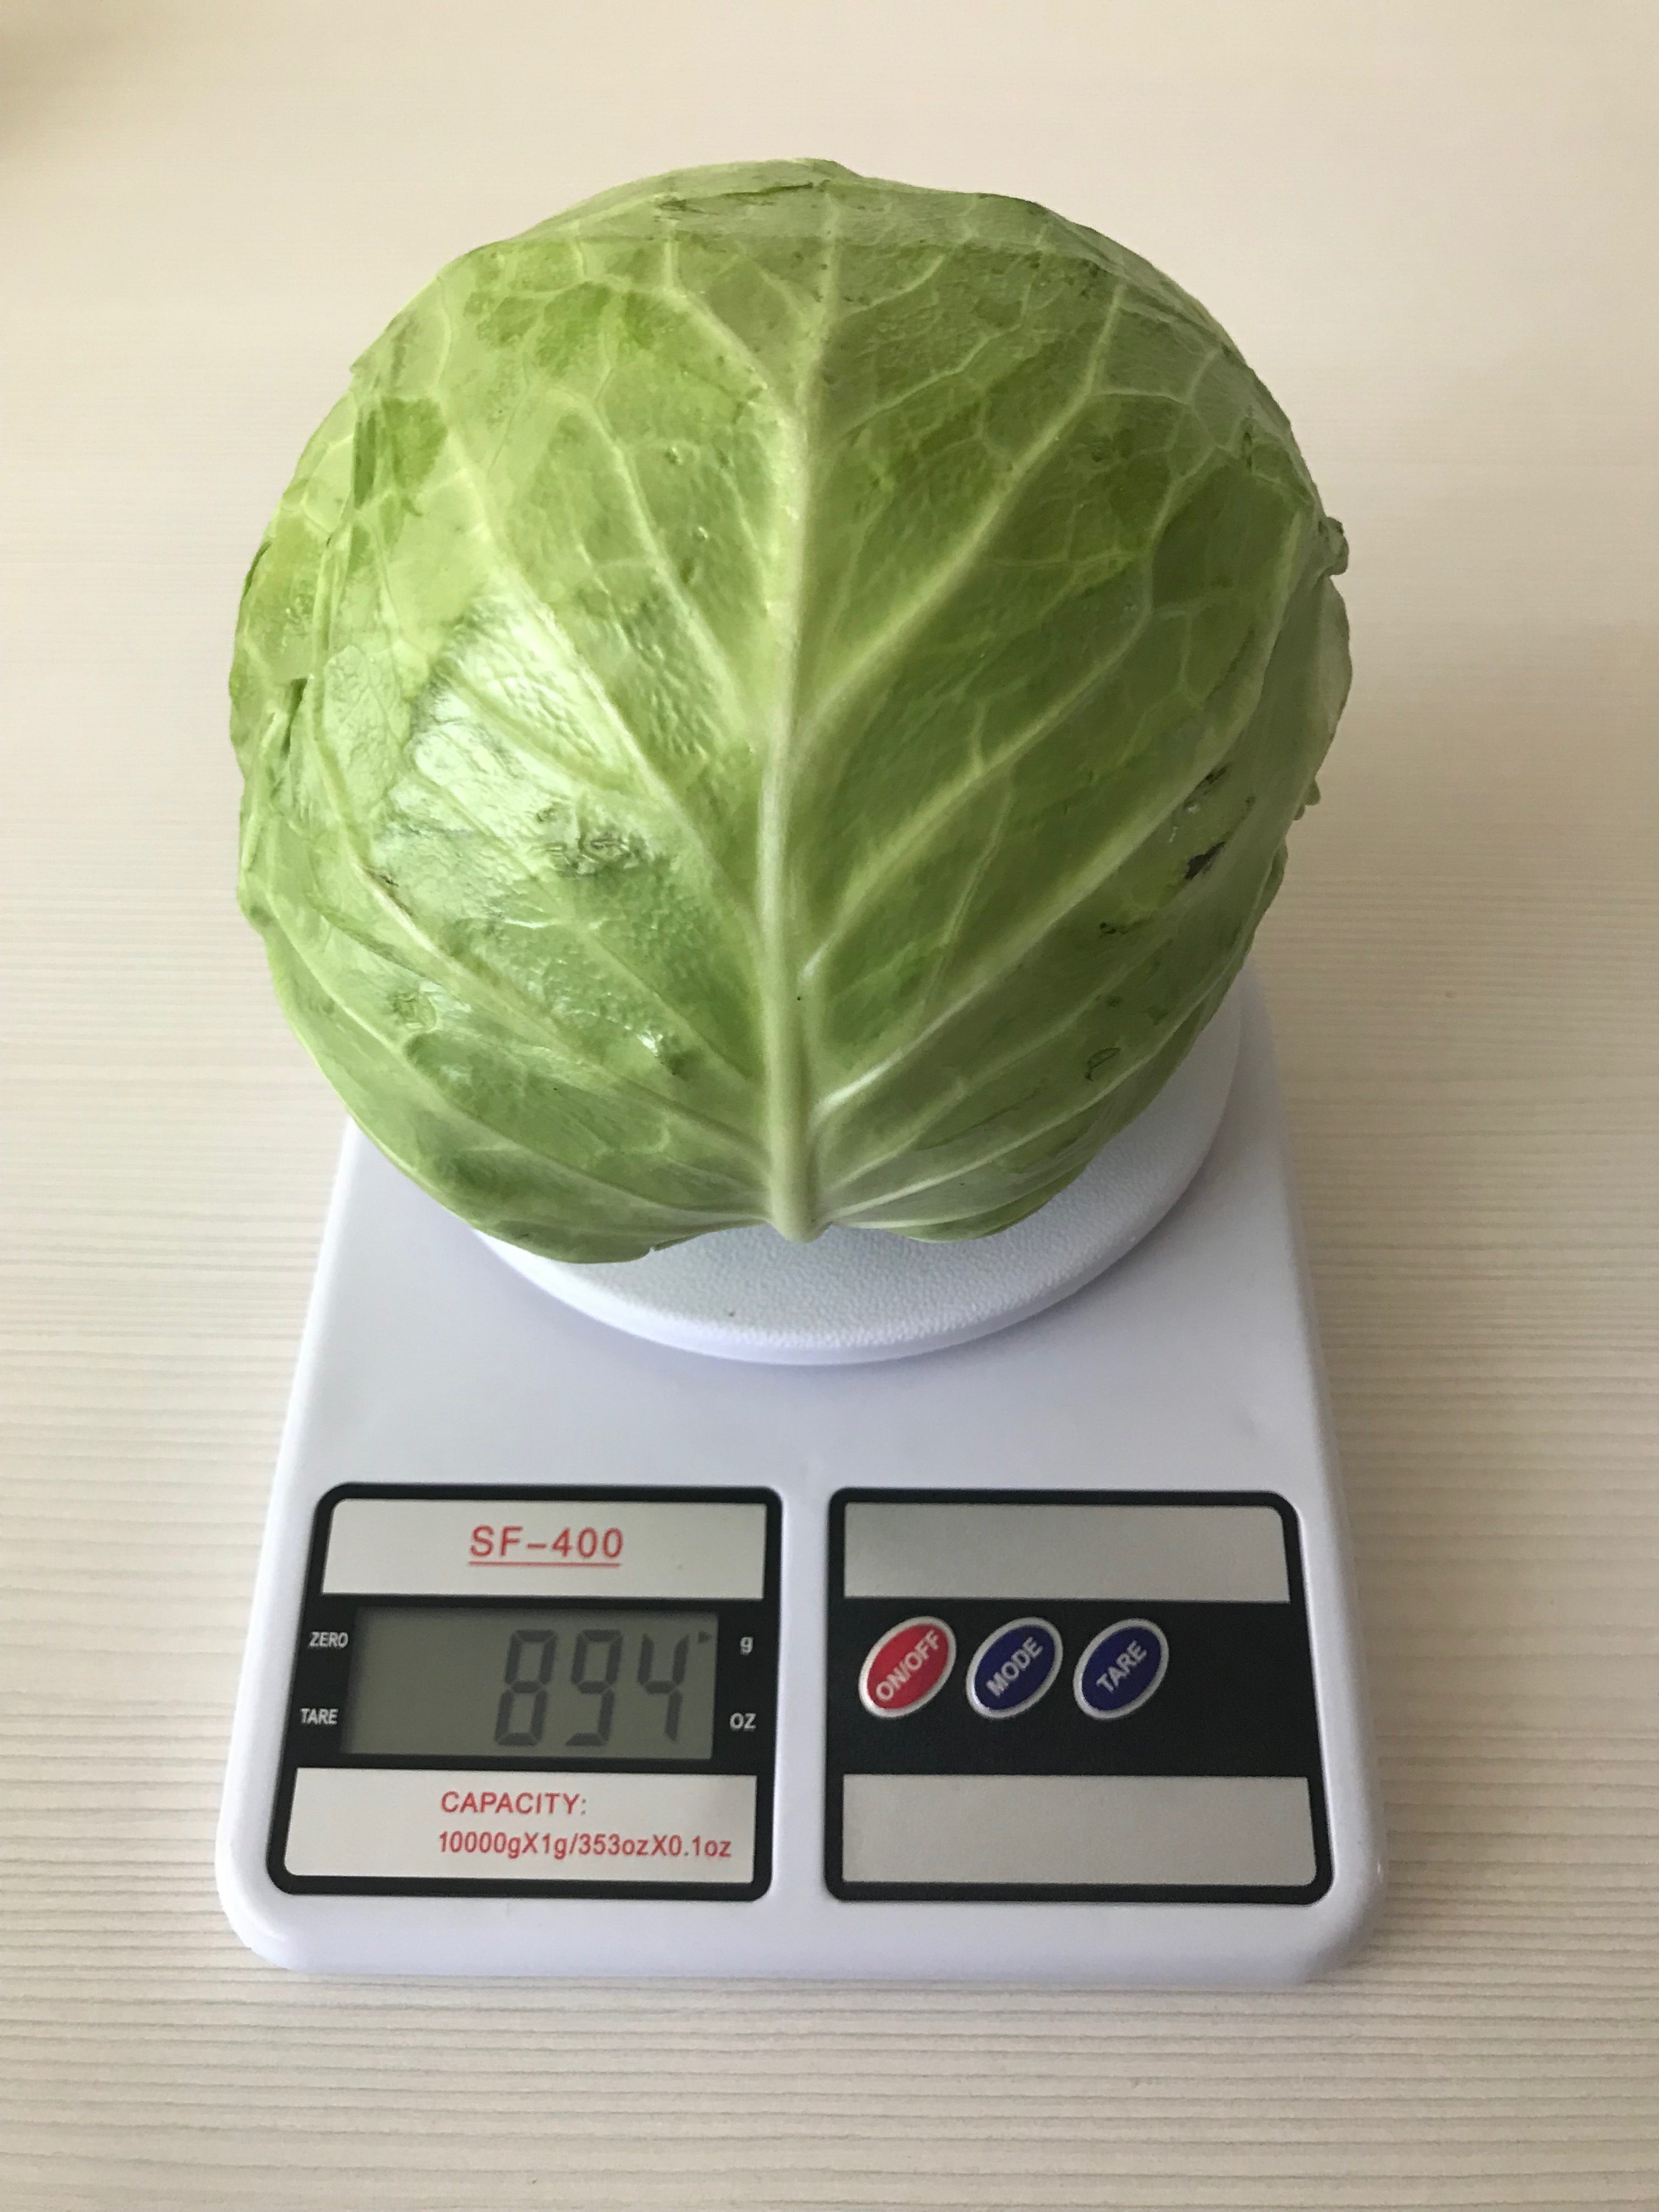 How much does a head of cabbage (medium) weigh?